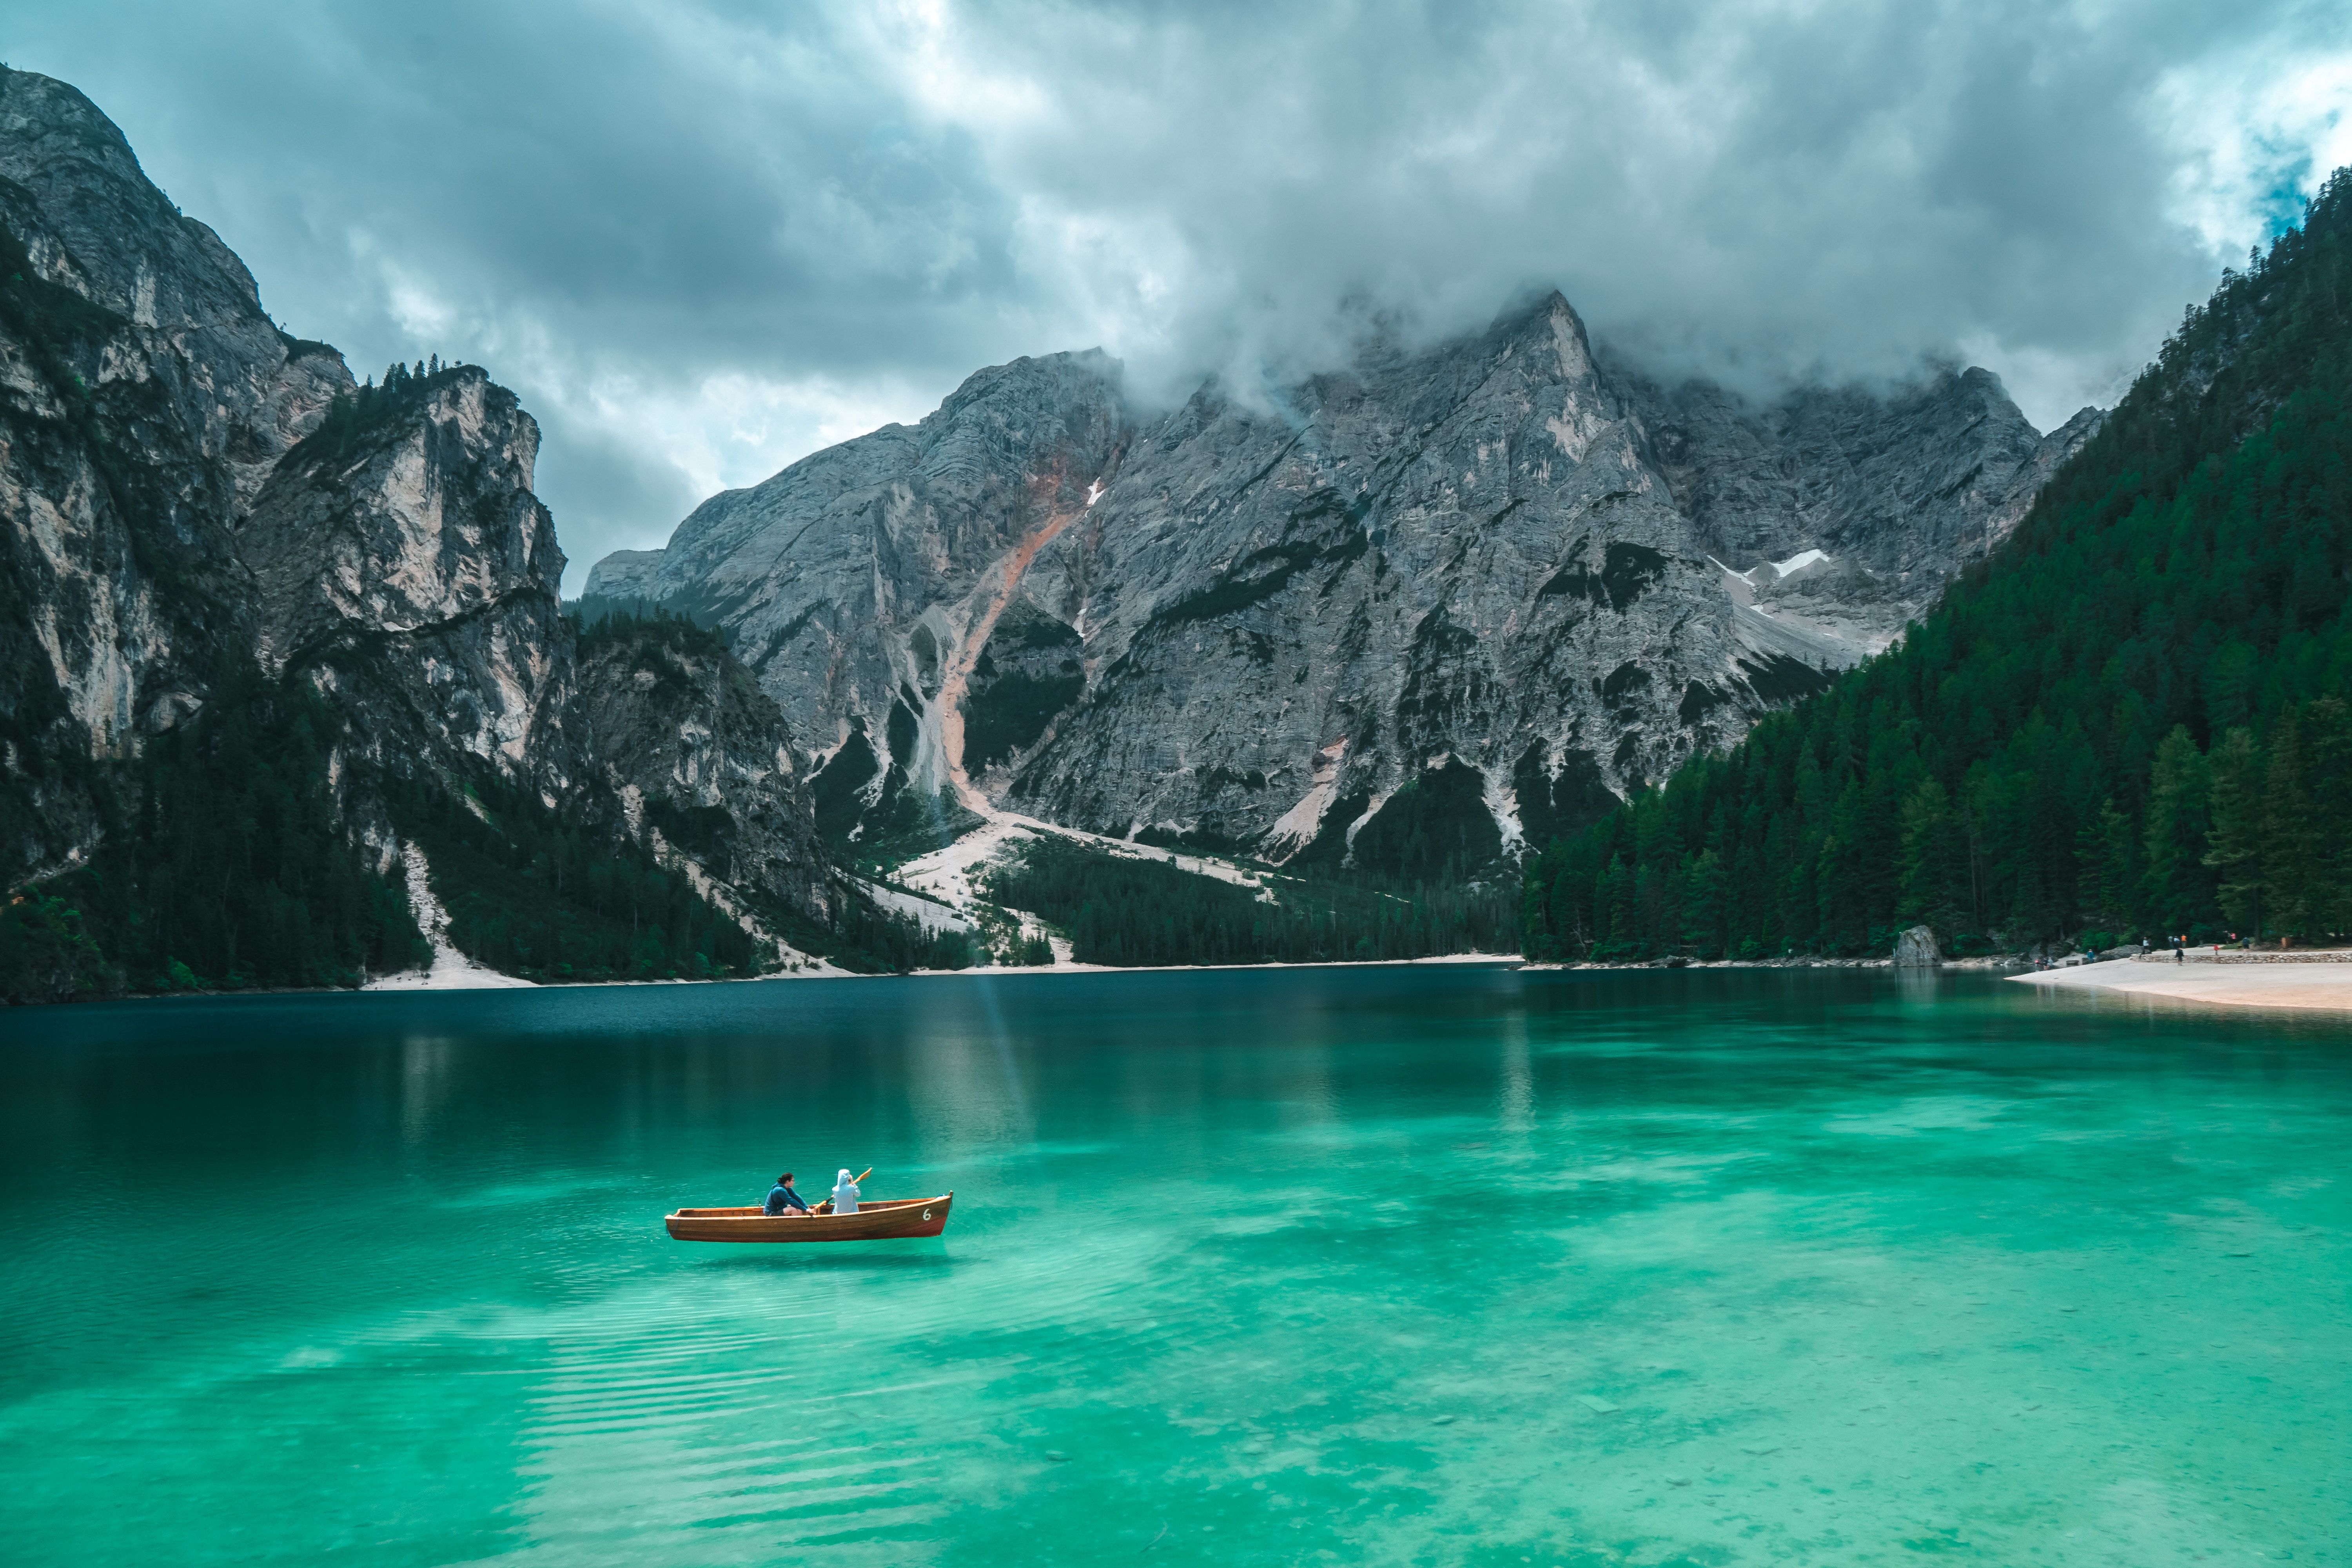 6000x4000 #italy, #nature, #water, #cloud, #blue, #overcast, #people, #Free picture, #moody, #green, #wallpaper, #mountain, #two, #cloudy, #canoe, #wallpaper hd, #boat, #storm, #clear, #forest, #ridge. Mocah HD Wallpaper